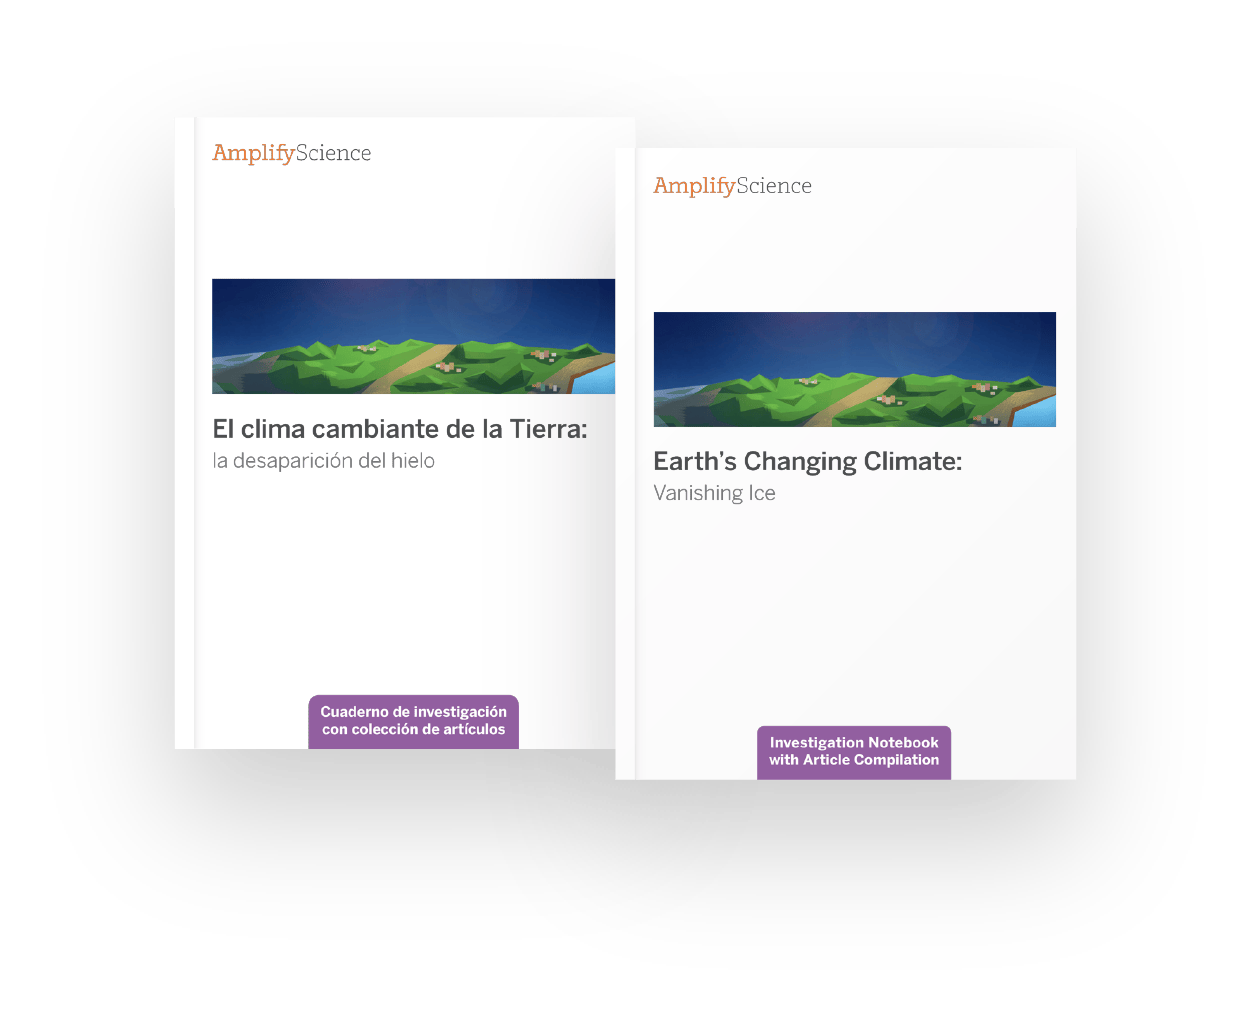 Two textbooks, one titled in spanish and the other in english, both on the topic of earth's changing climate, displayed side by side with similar cover designs.